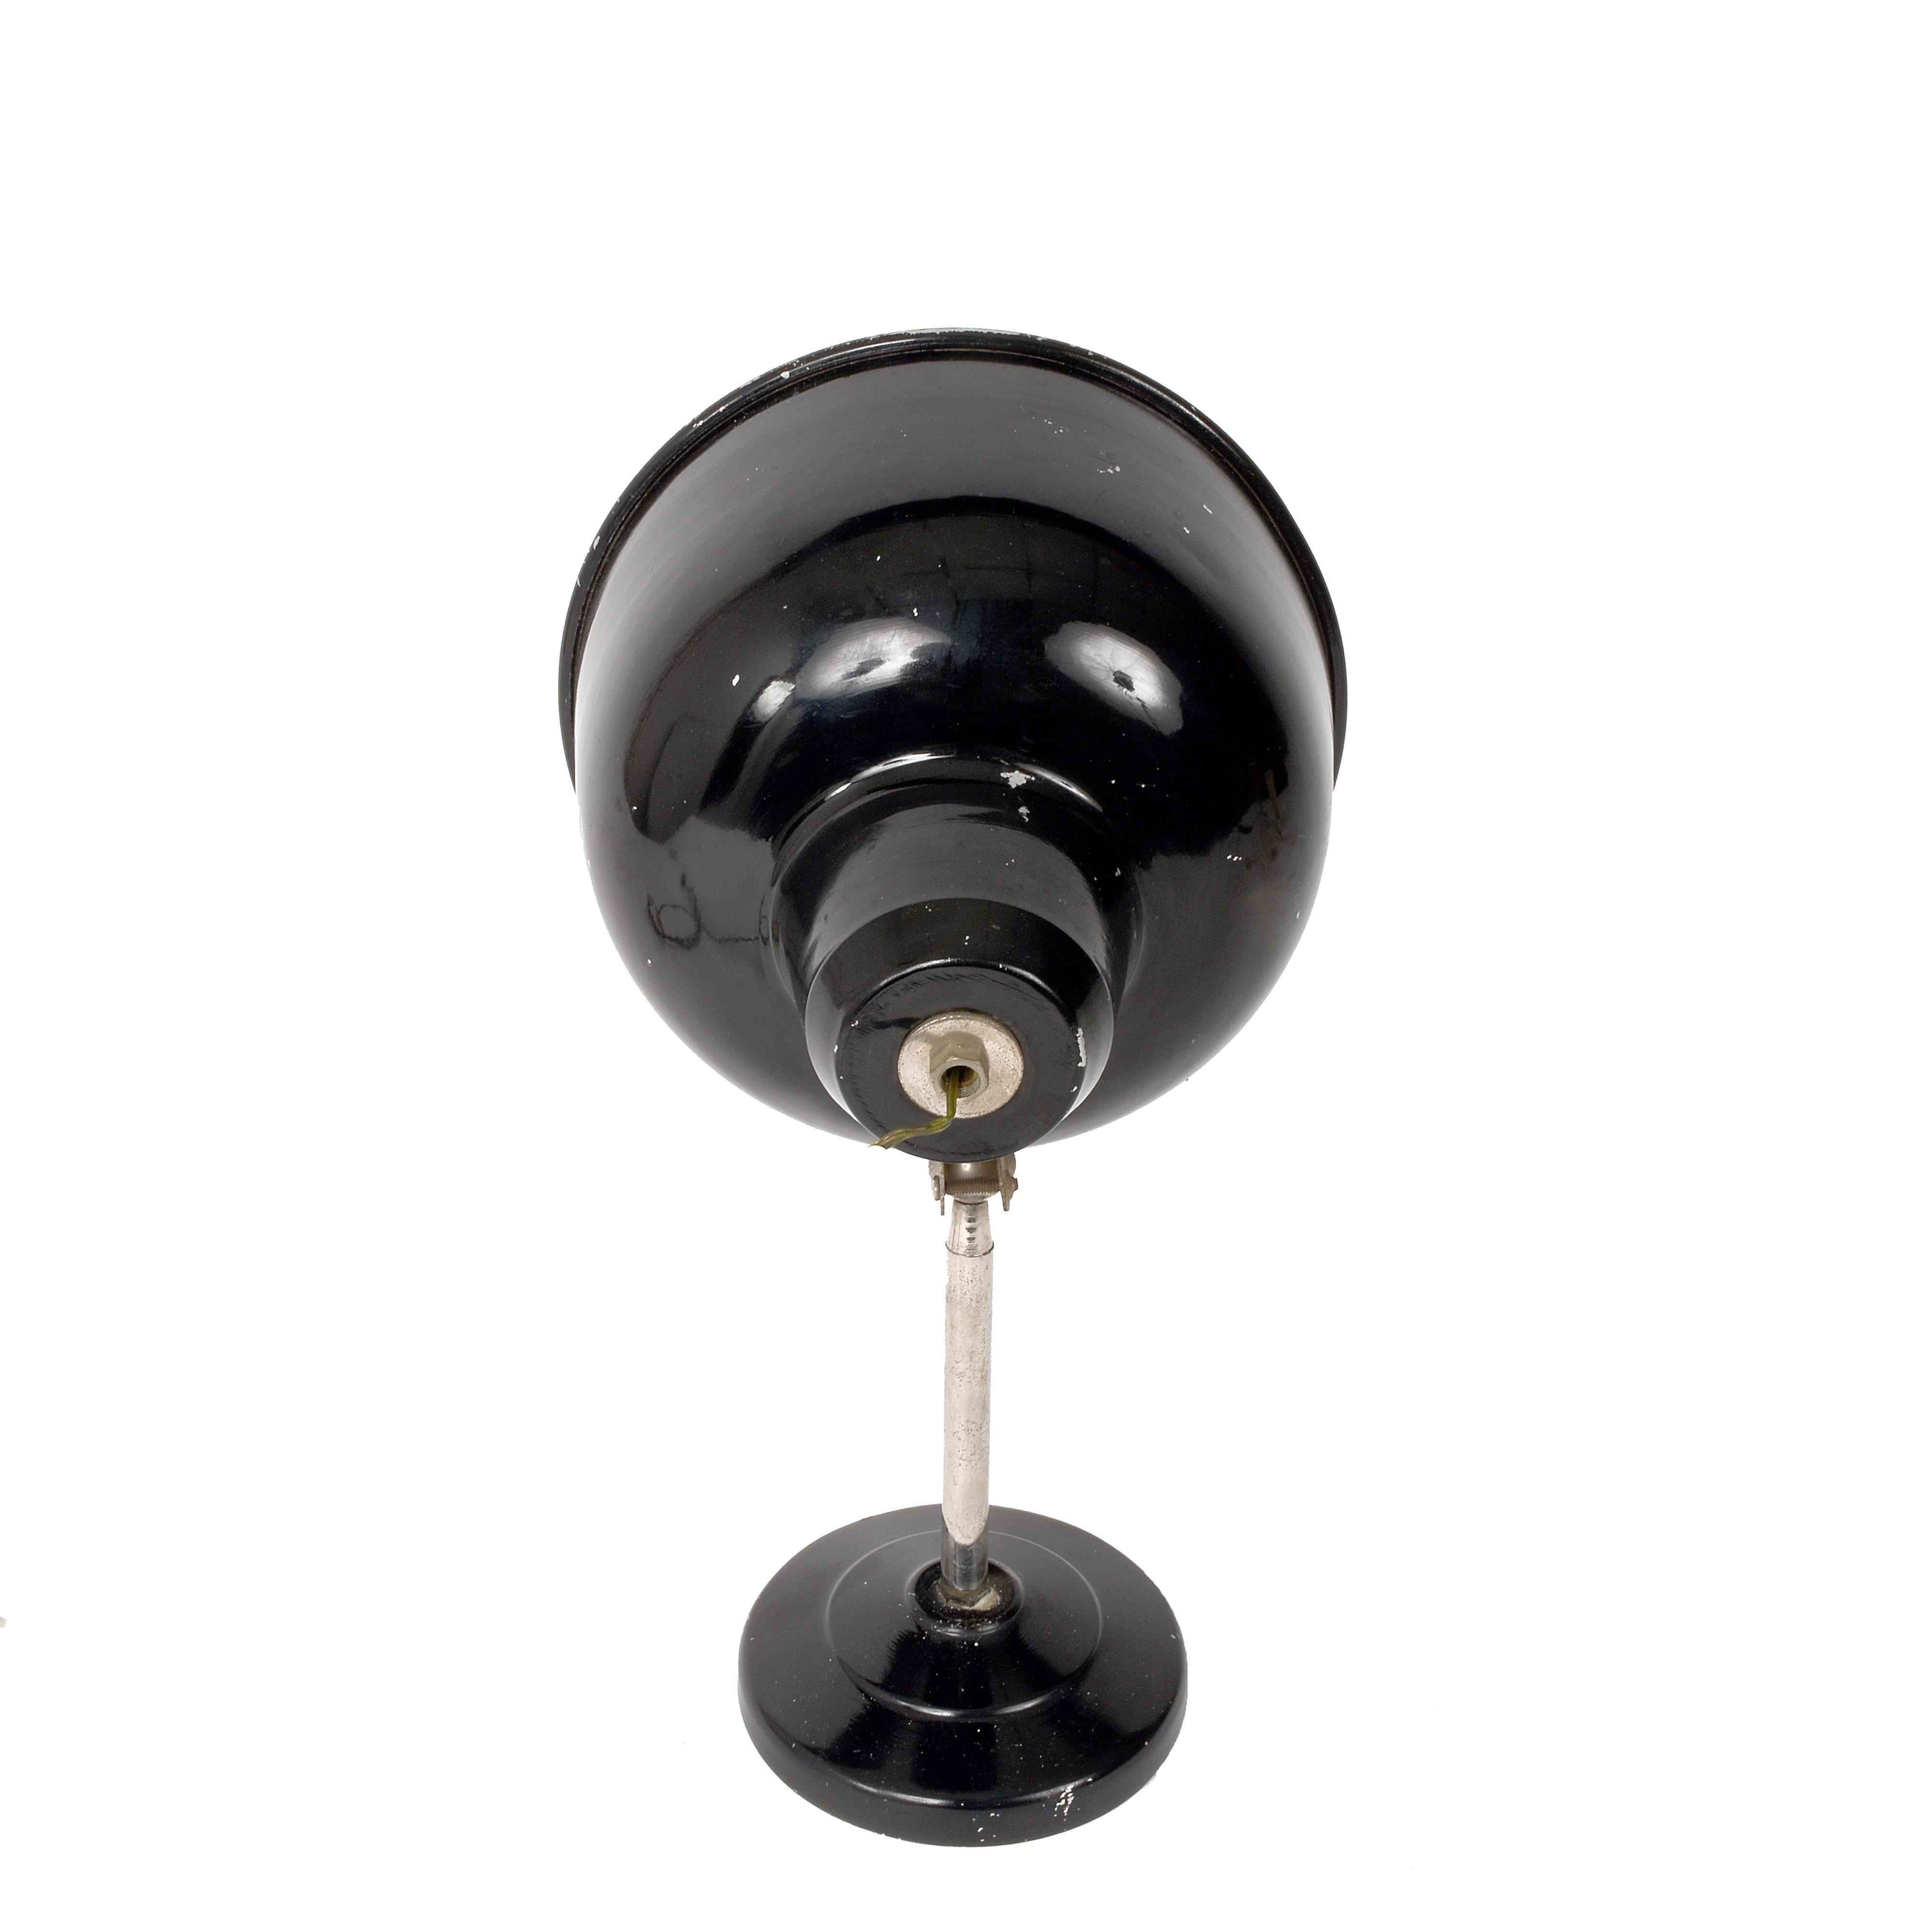 This marvellous lamp is in black enameled metal. It has its original bulb of the time at 125 volts. Works with 250 volt lamps. Do not use the bulb with 250 volt current, except with a current transformer.